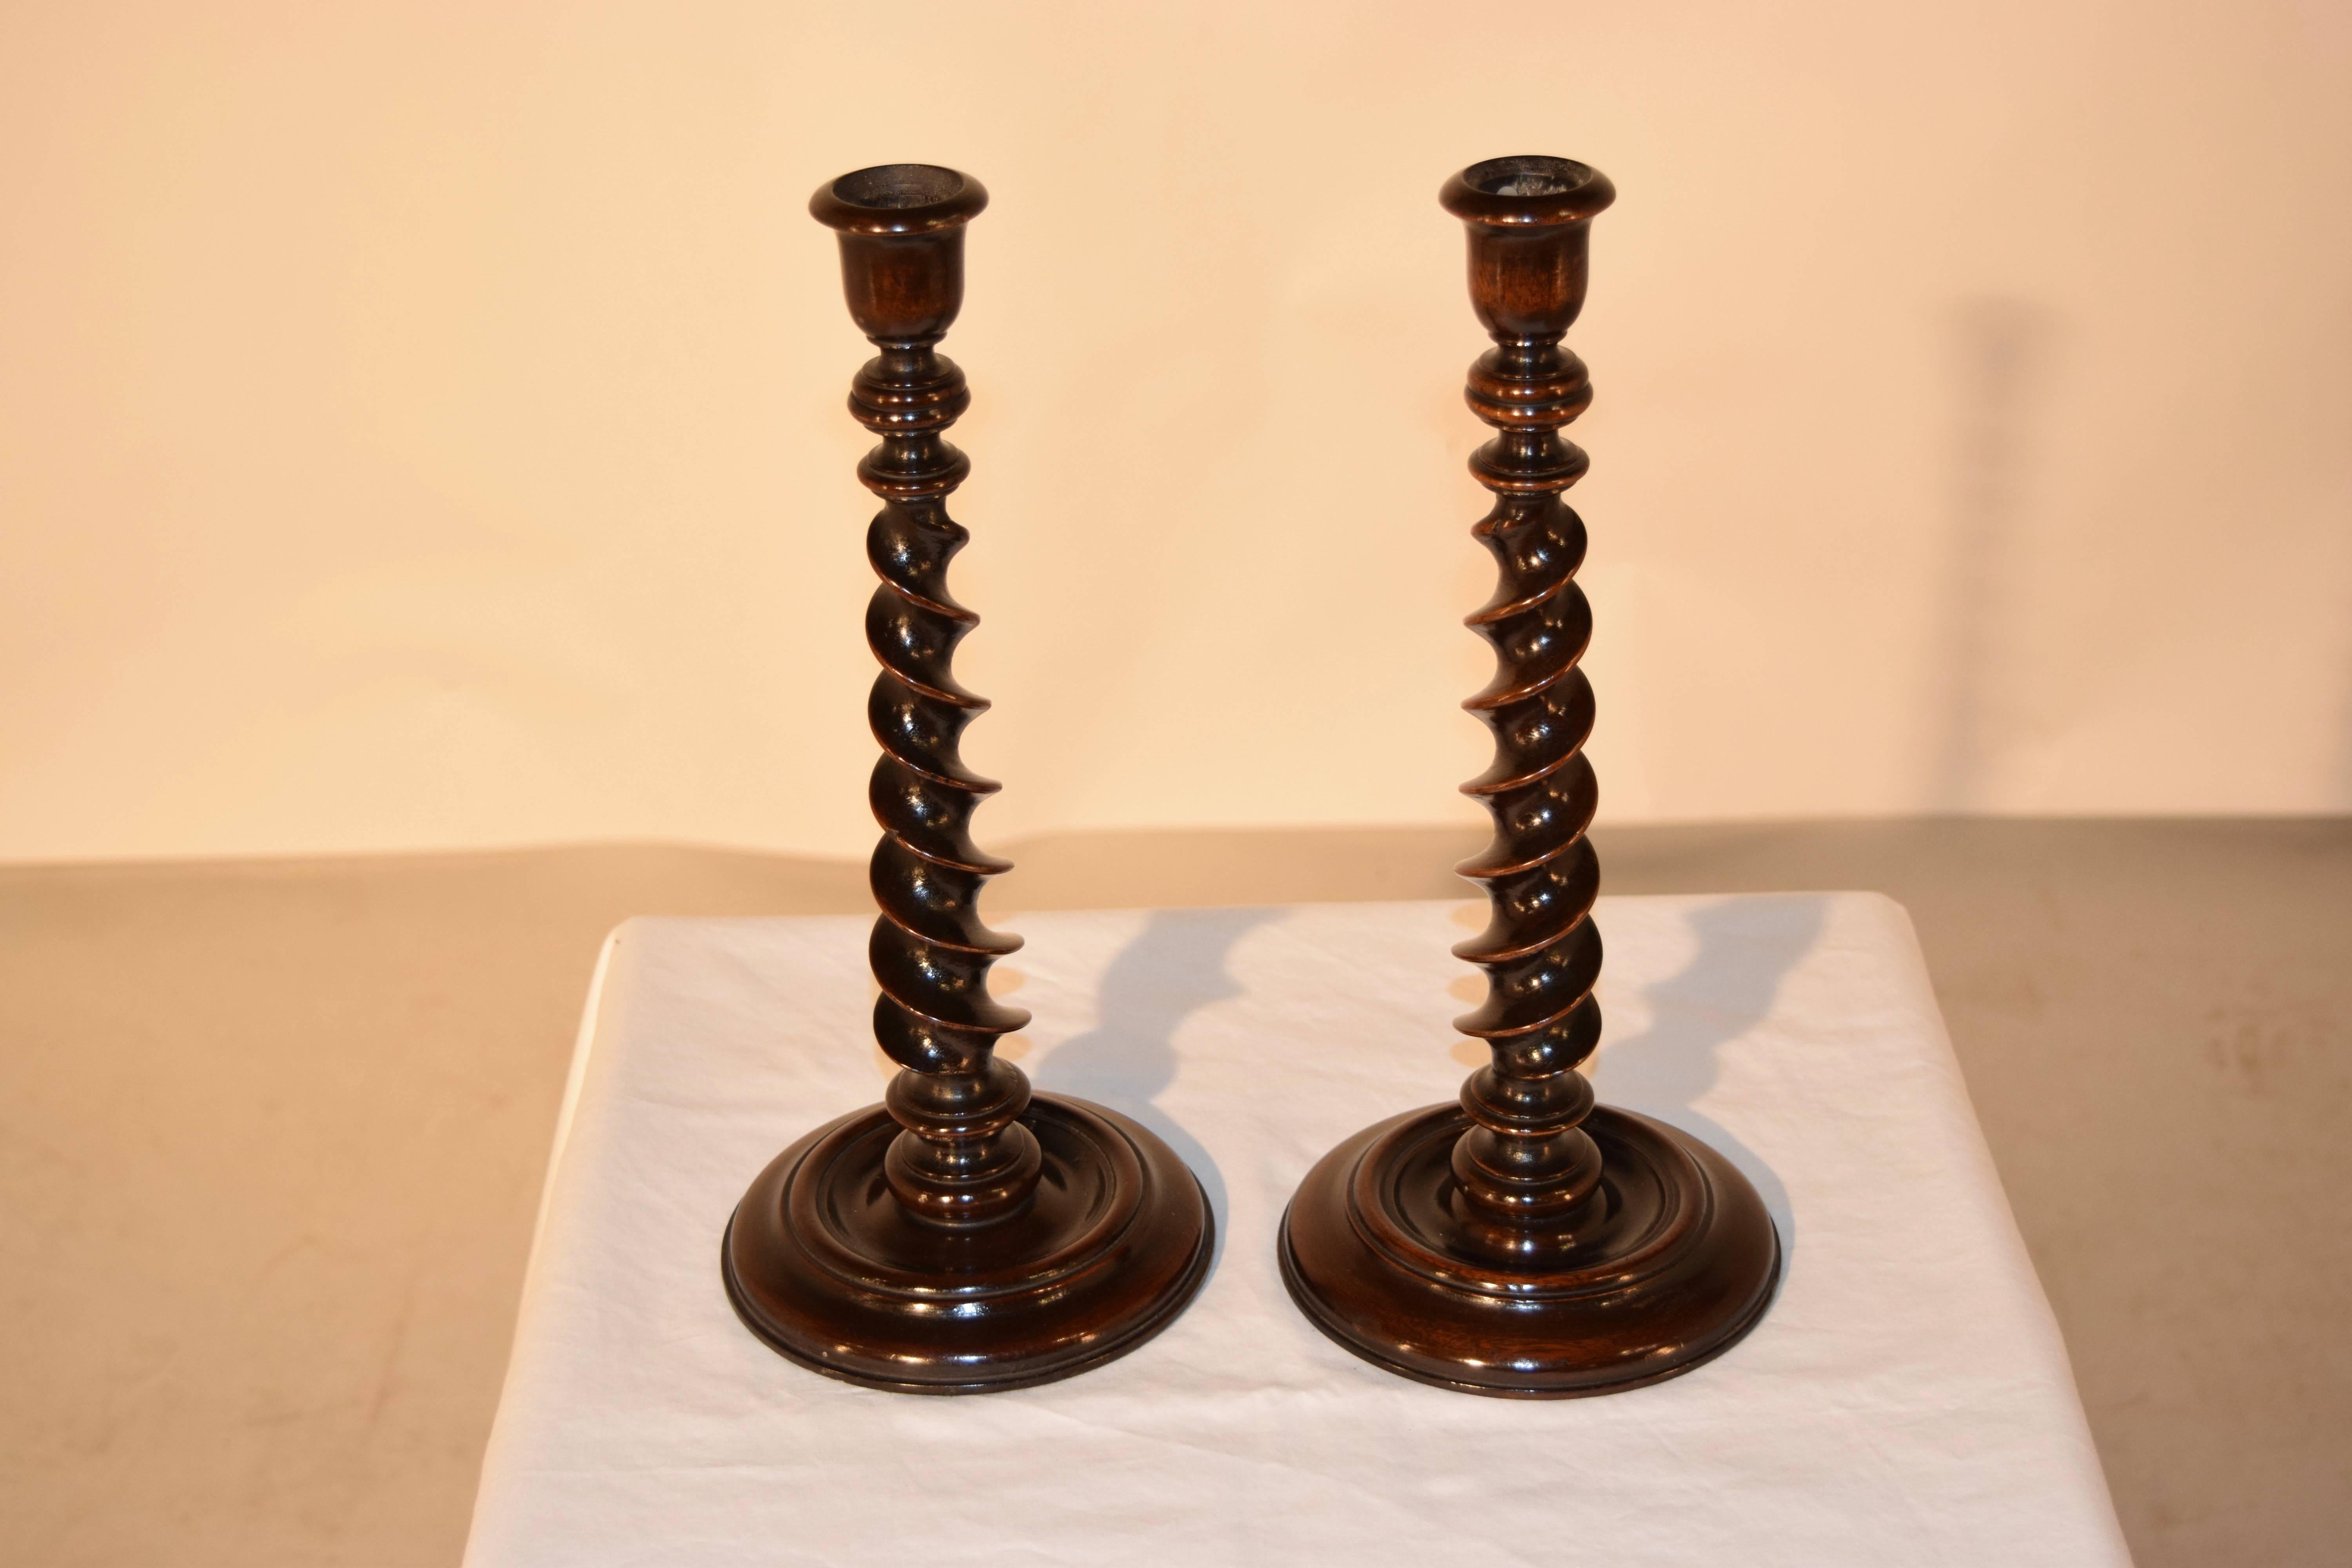 19th century pair of English candlesticks made from oak with wonderfully hand-turned ribbon barley twist stems and hand-turned candle cups, supported upon hand-turned bases.